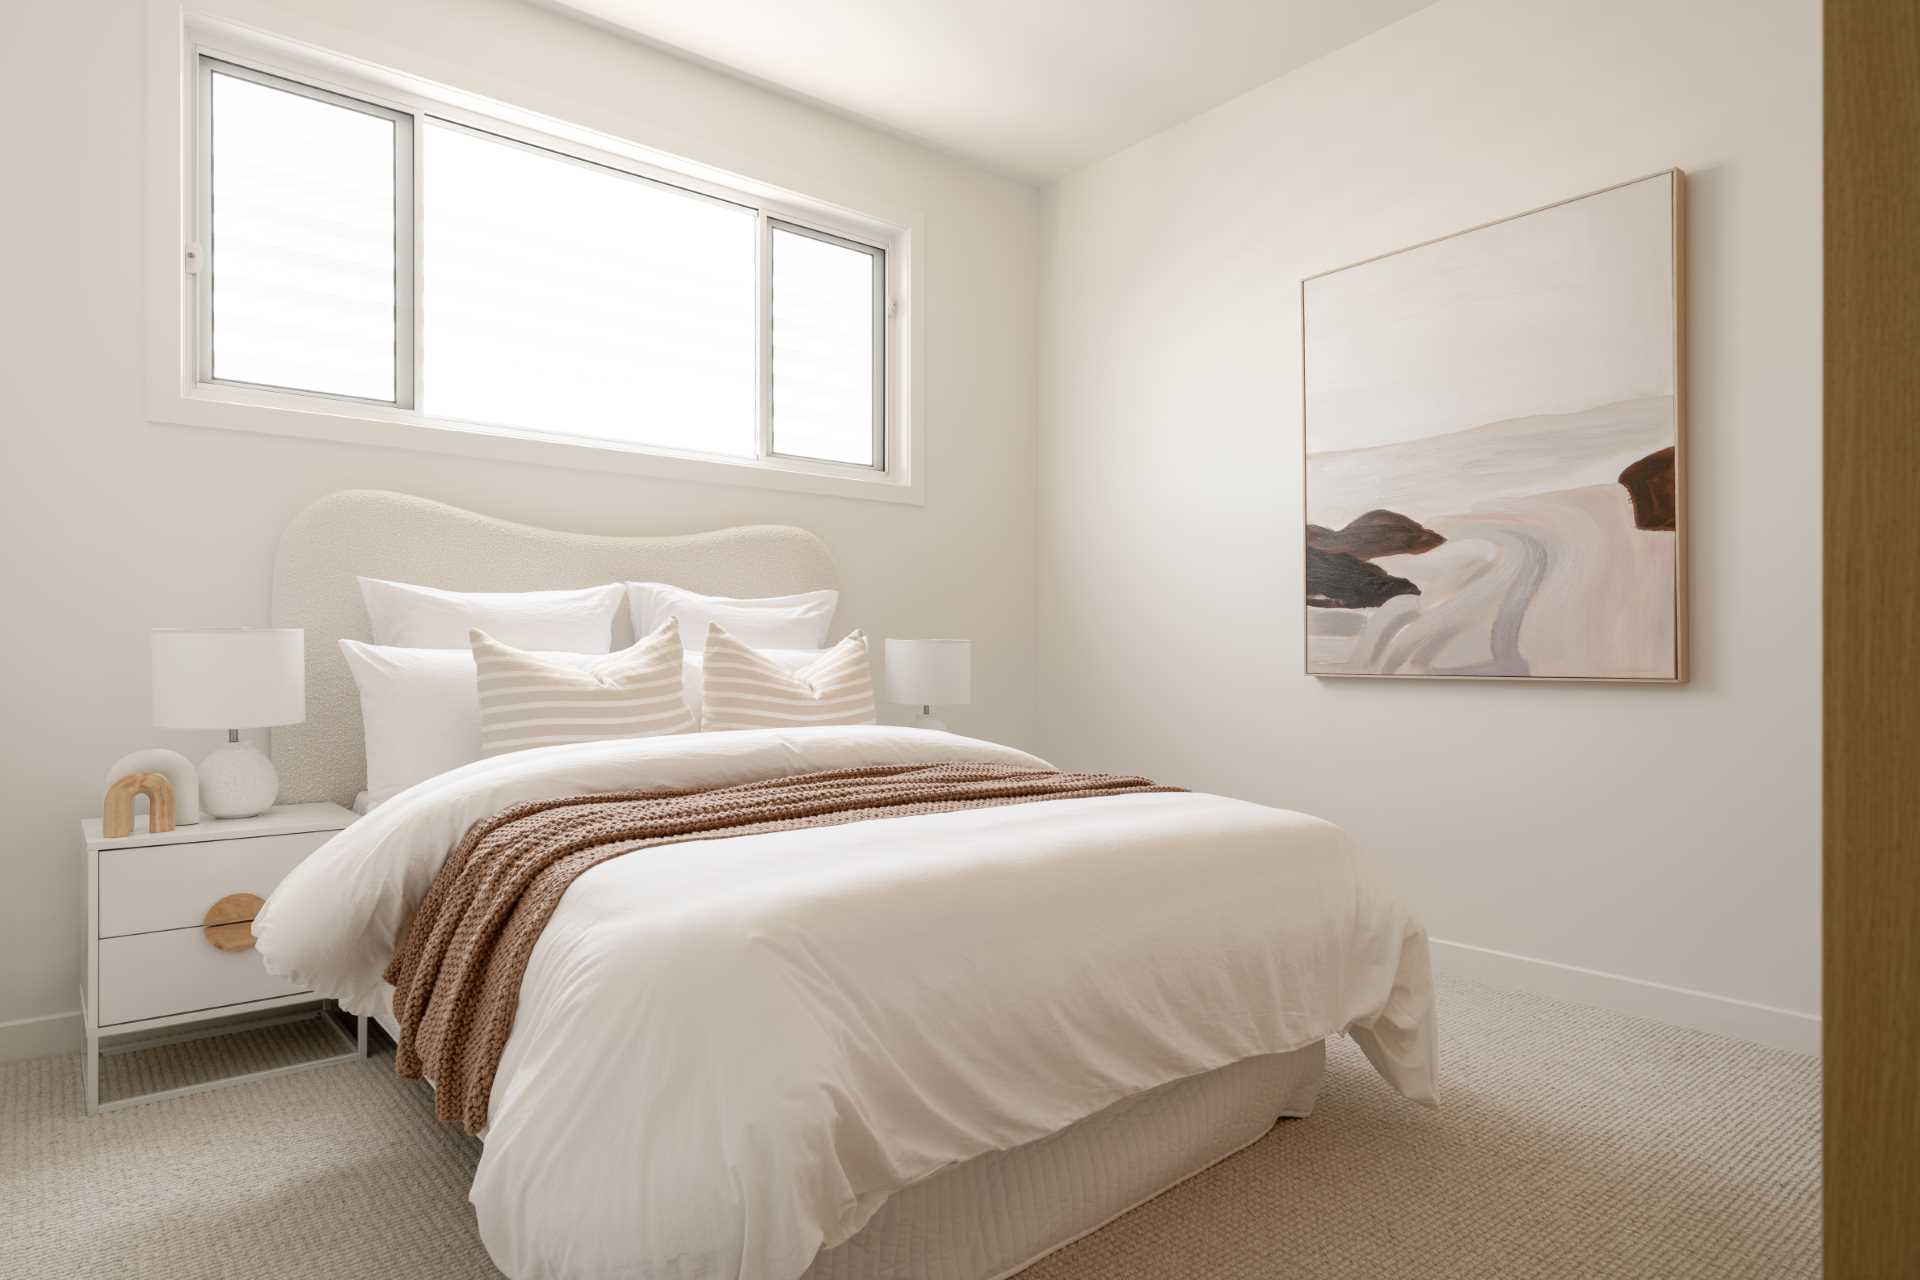 A contemporary bedroom with a neutral color palette.